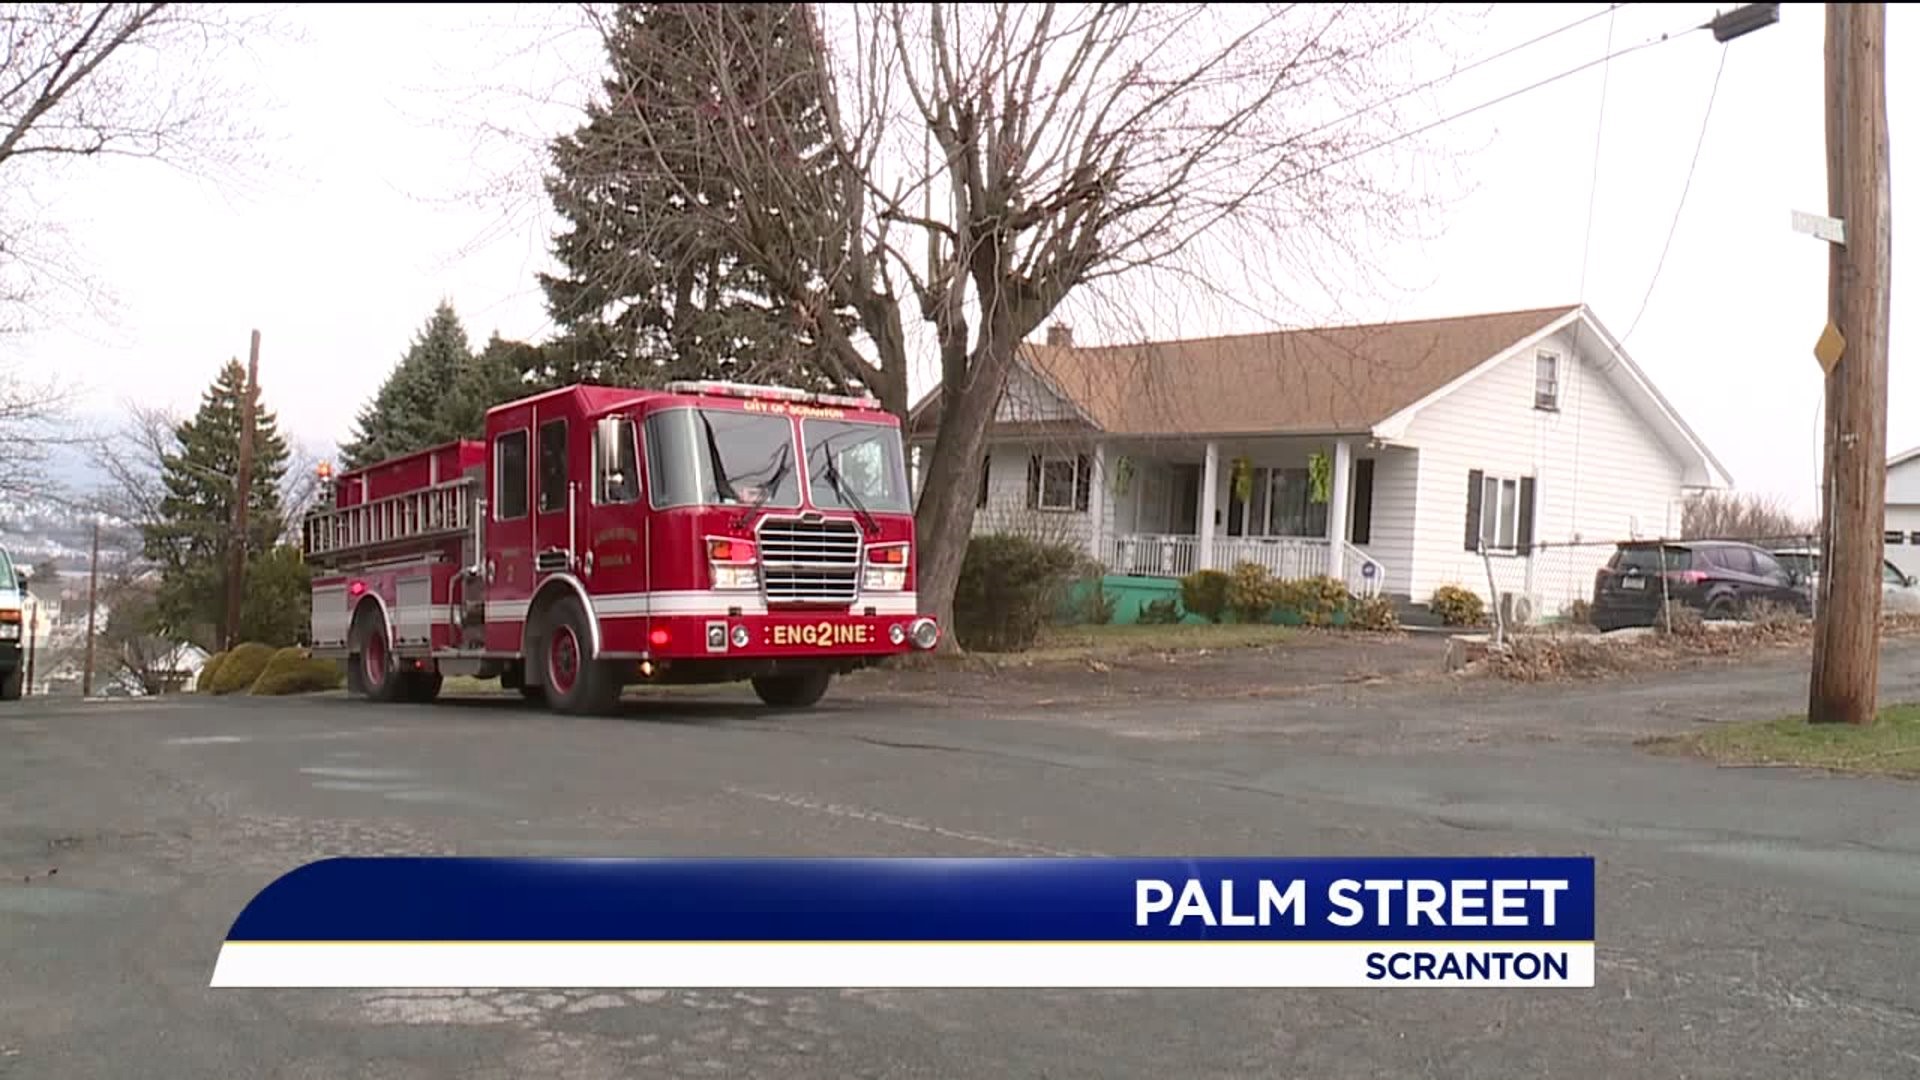 Family Taken to the Hospital After Exposure to Carbon Monoxide